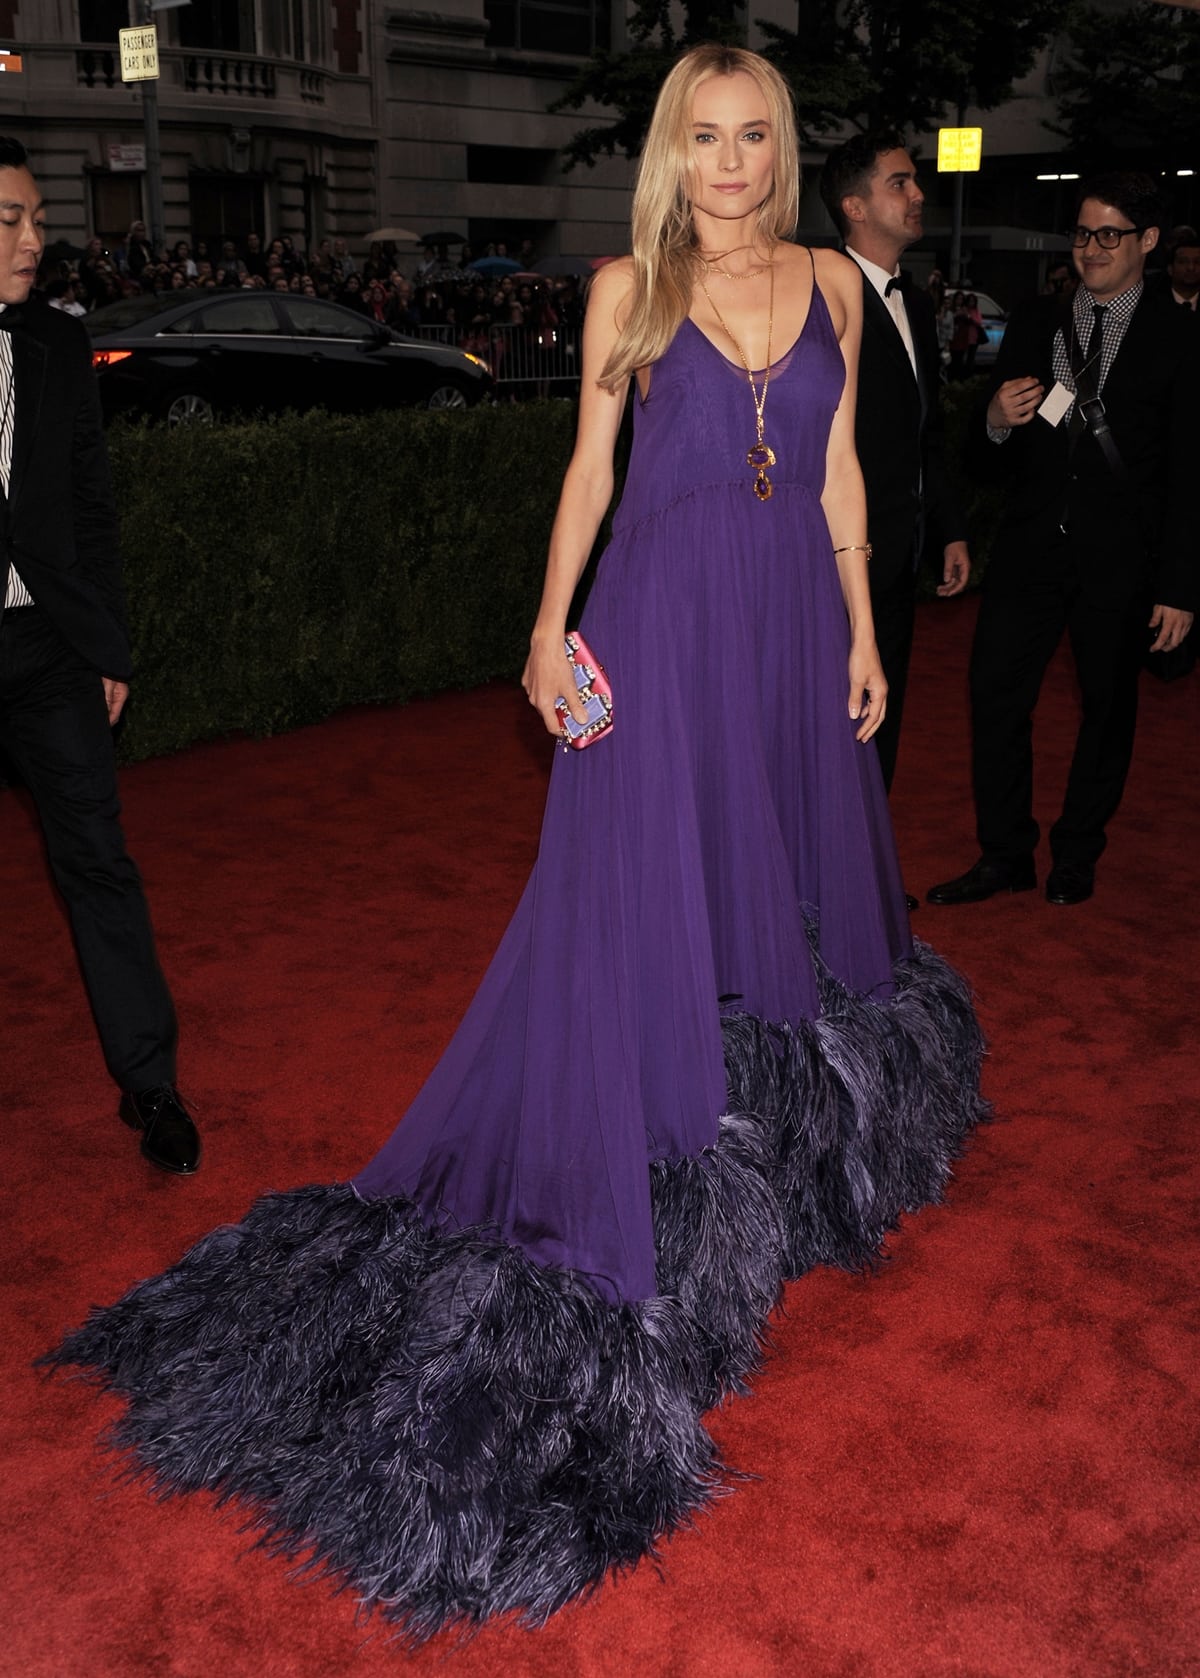 Diane Kruger styled a purple Prada gown with a clutch and shoes from the same fashion house